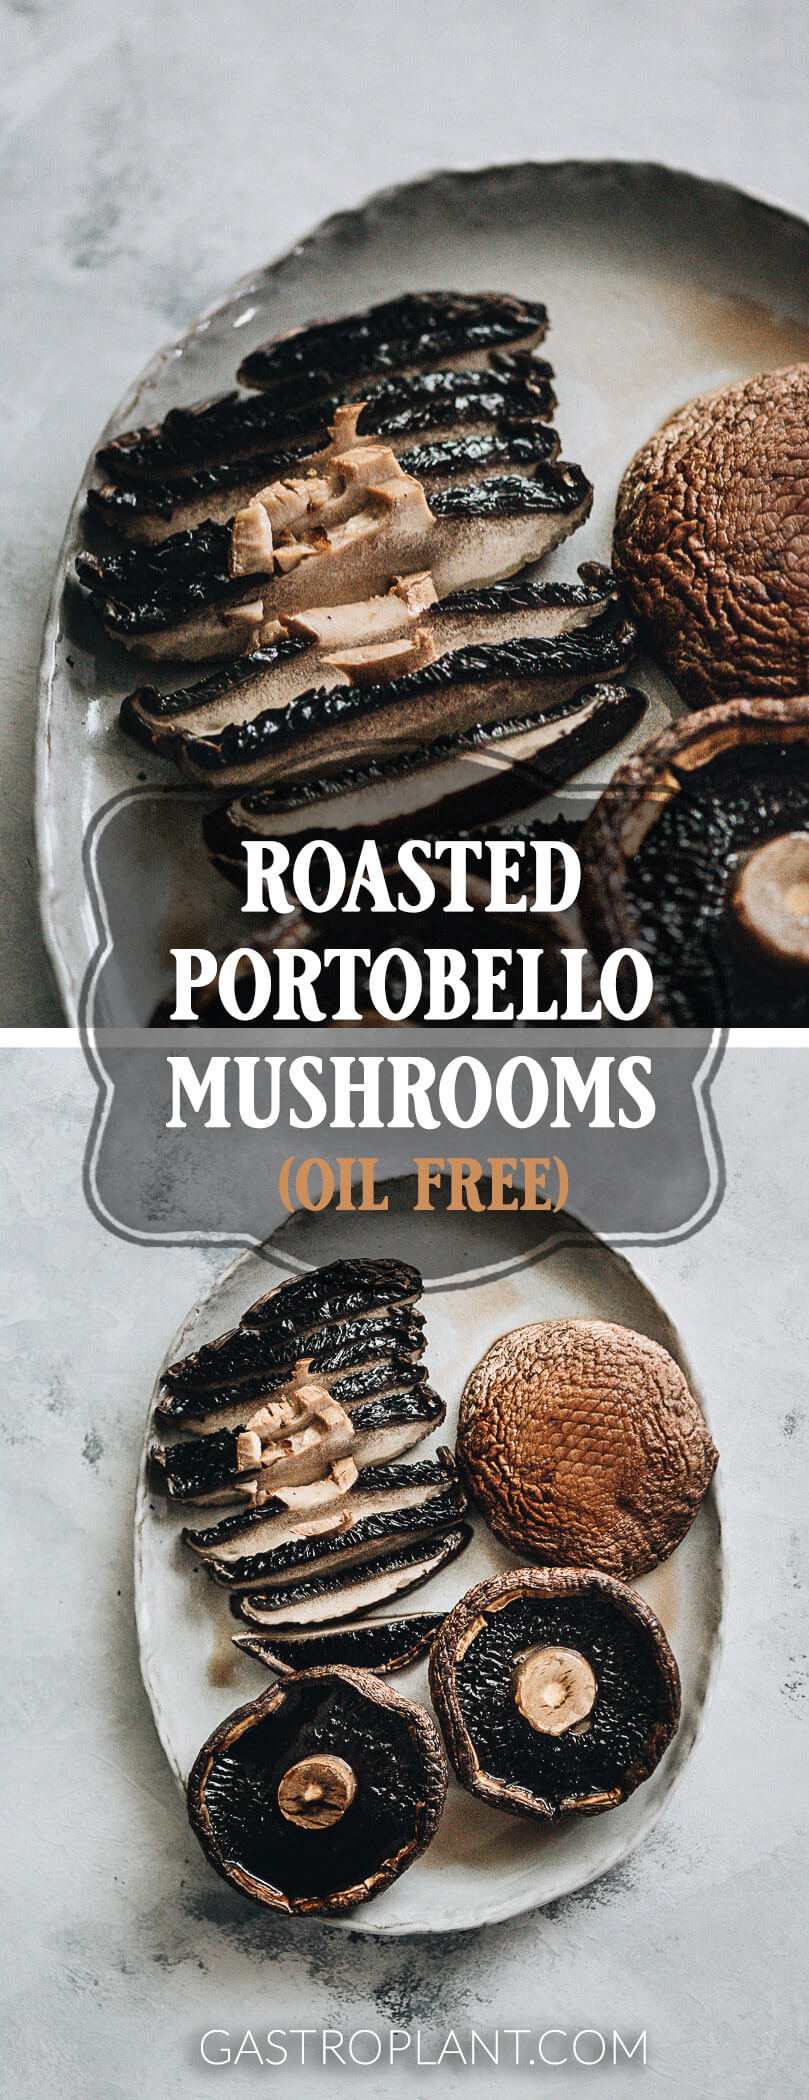 Roasted Portobello Mushrooms - These roasted portobello mushrooms are tender, juicy, and very concentrated in flavor. They work well in a Buddha bowl, a salad, or even on their own. And the recipe couldn’t be simpler.